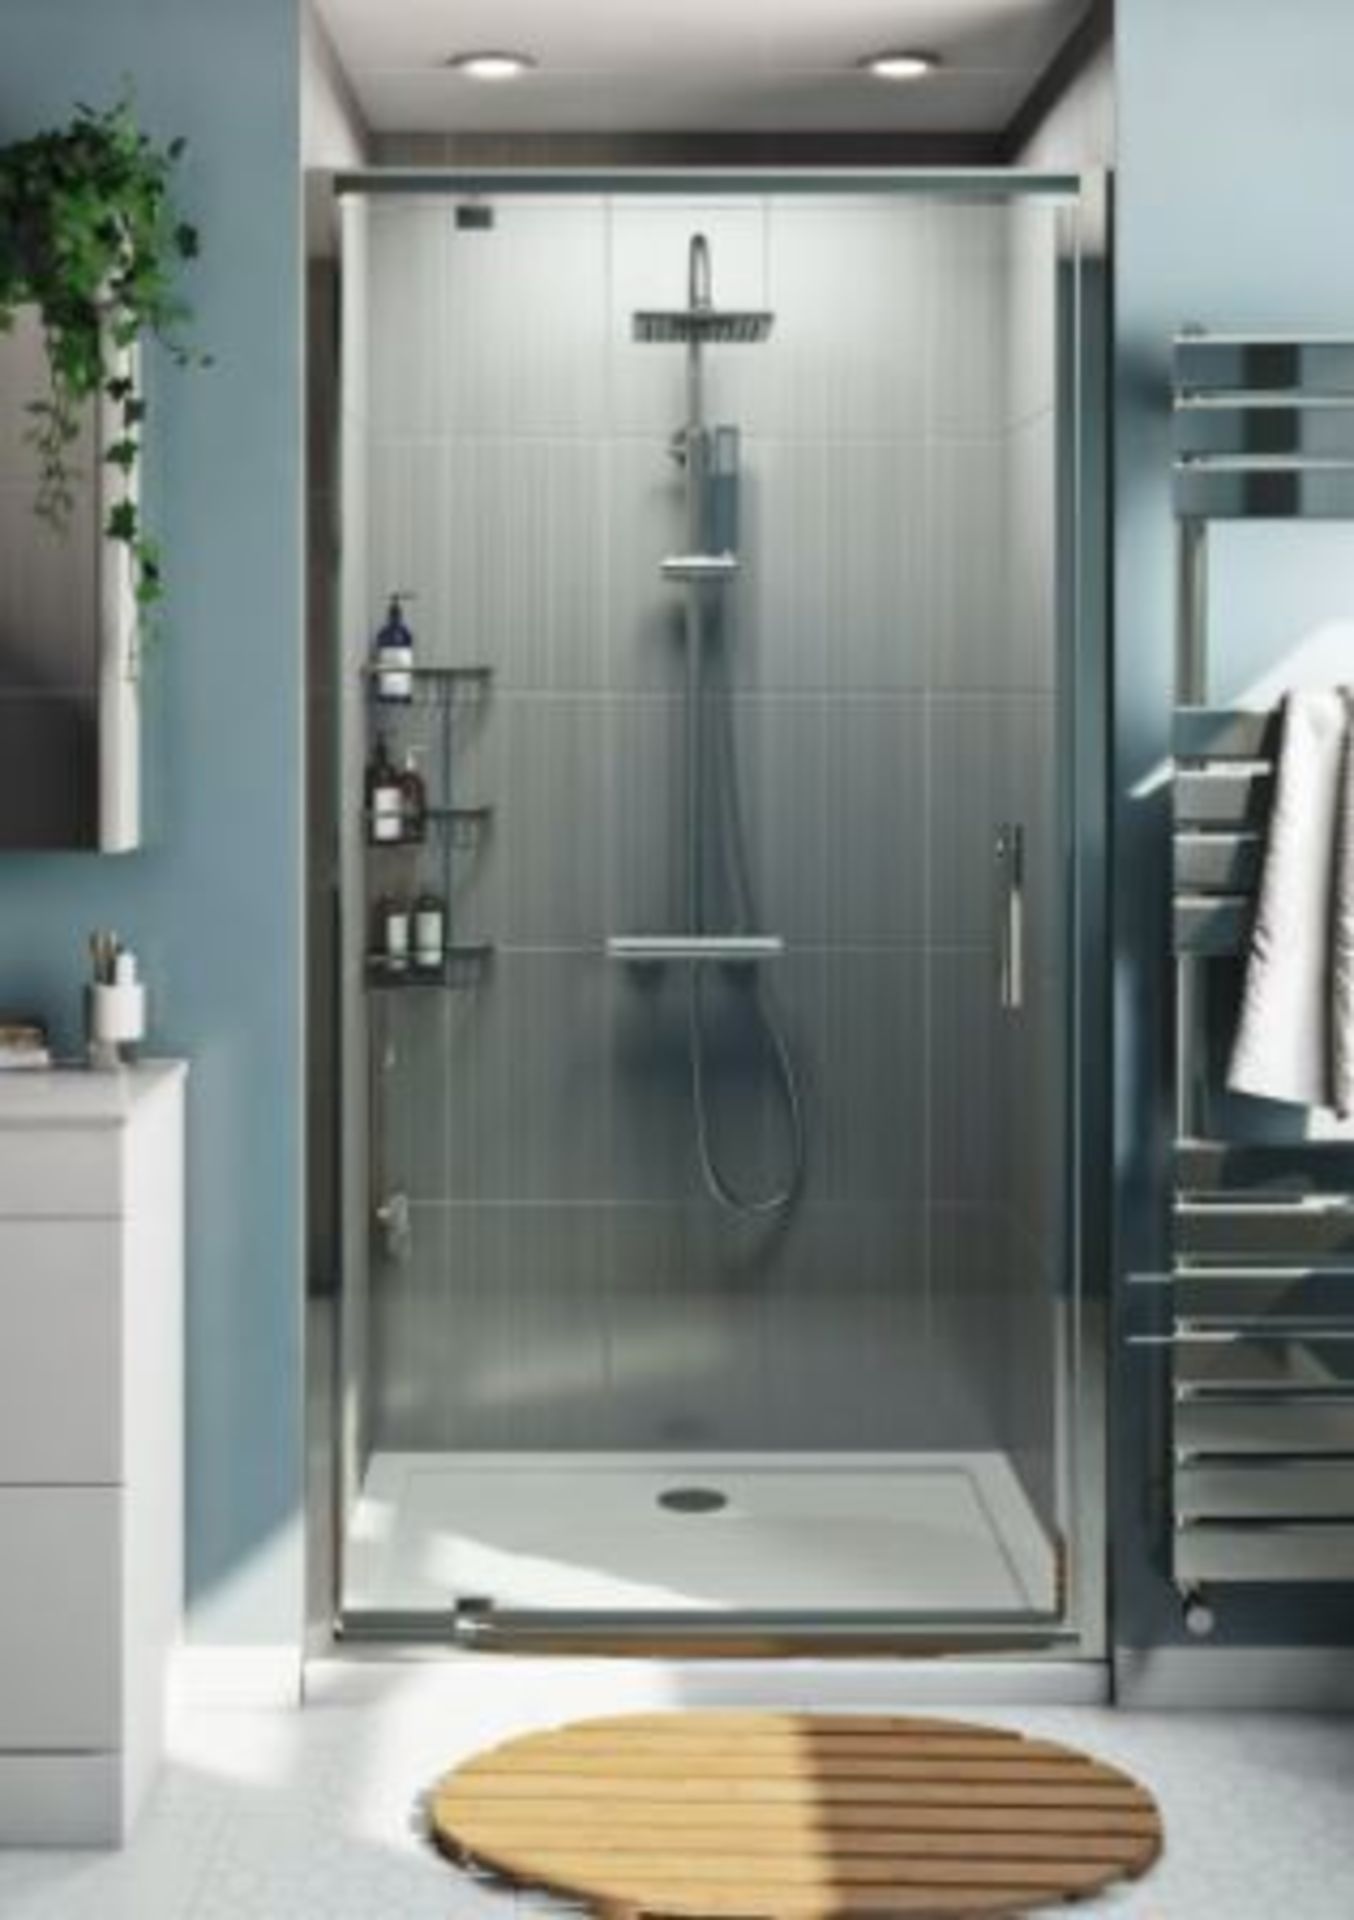 RRP £249. Orchard 6mm pivot hinged glass shower door with silver frame 1850. Appears unused.